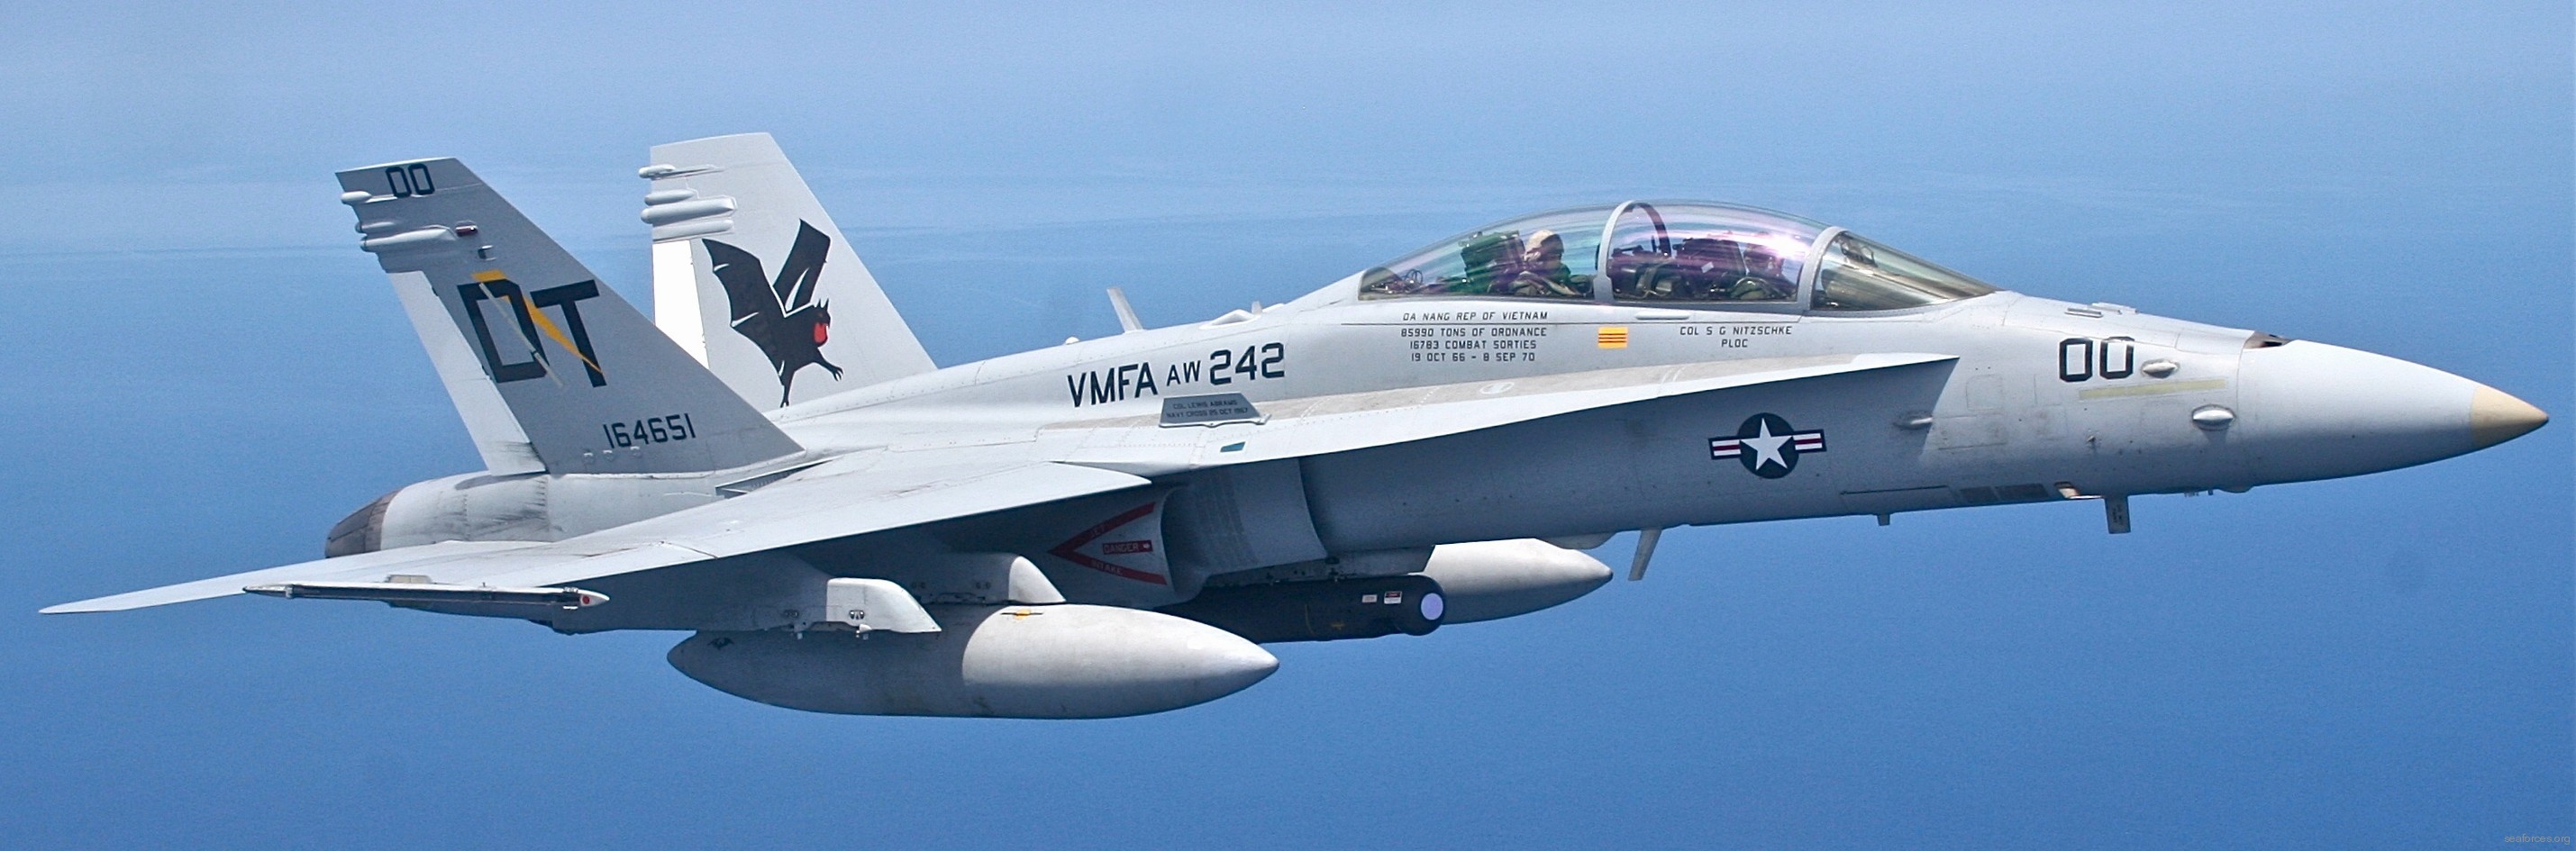 vmfa(aw)-242 bats marine all-weather fighter attack squadron usmc f/a-18d hornet 17